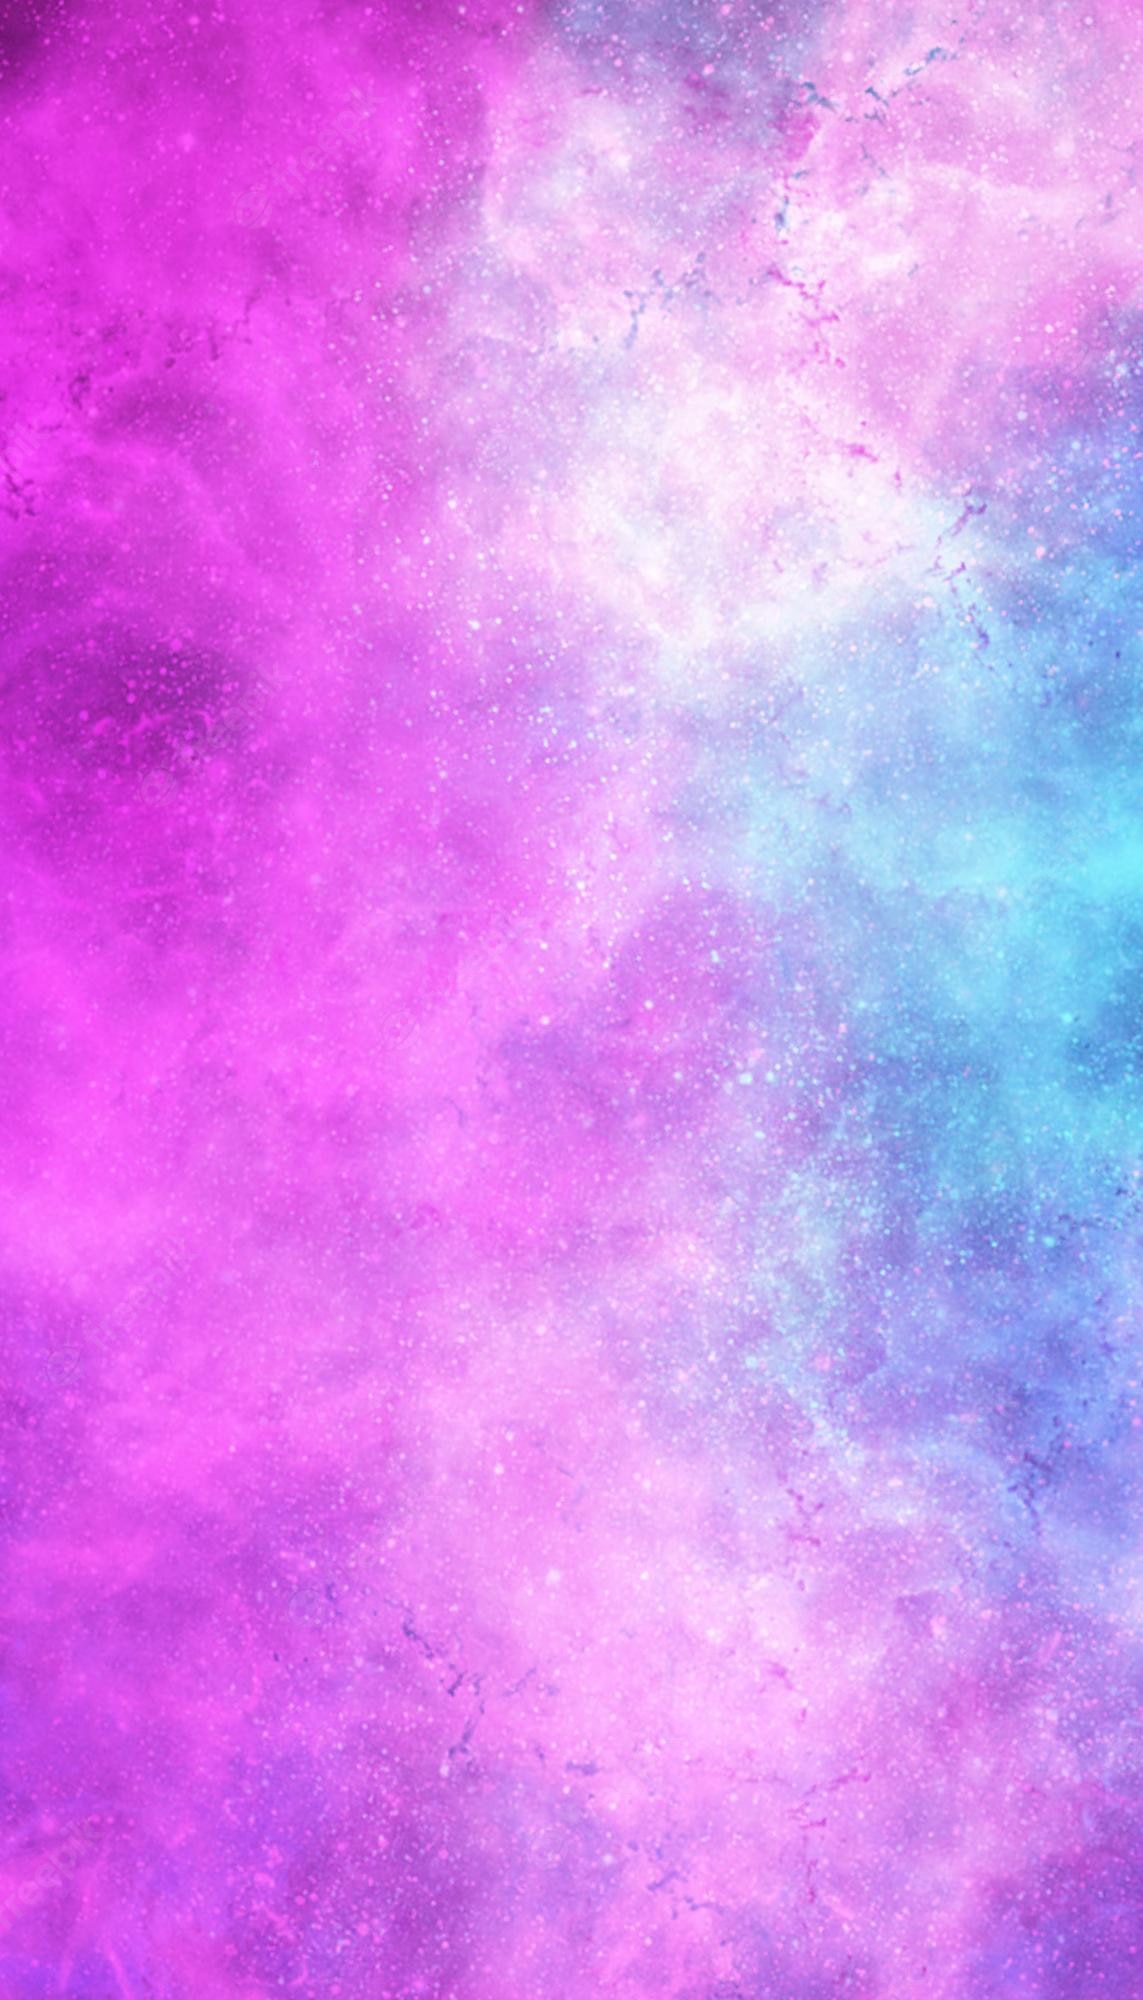 Premium Vector. Space background with pink and blue spots